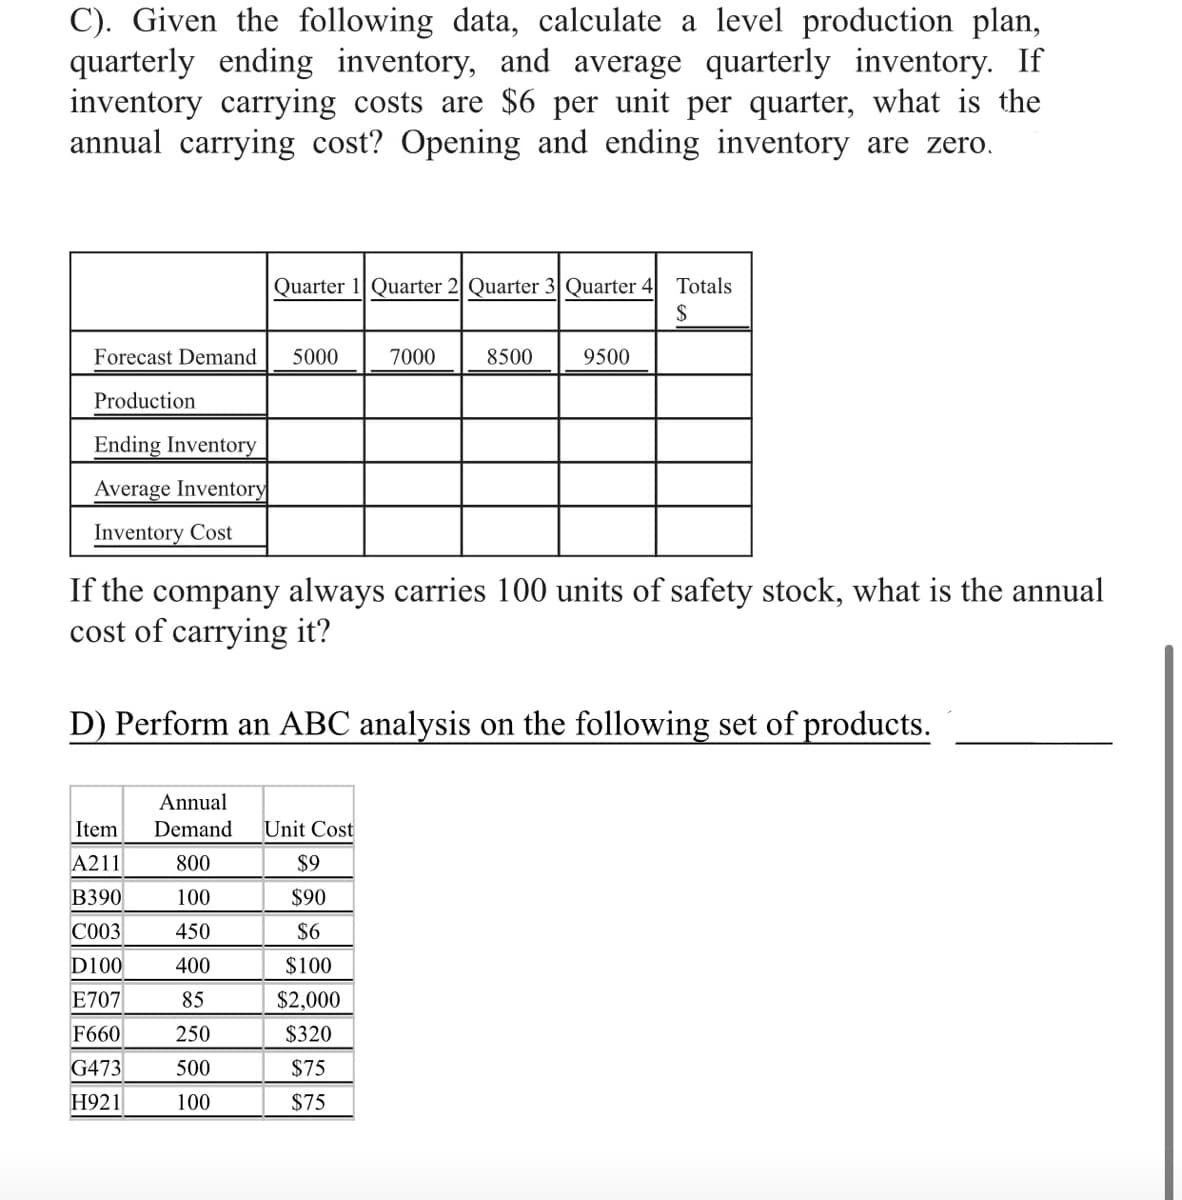 C). Given the following data, calculate a level production plan,
quarterly ending inventory, and average quarterly inventory. If
inventory carrying costs are $6 per unit per quarter, what is the
annual carrying cost? Opening and ending inventory are zero.
Quarter 1 Quarter 2| Quarter 3 Quarter 4
Totals
Forecast Demand
5000
7000
8500
9500
Production
Ending Inventory
Average Inventory
Inventory Cost
If the company always carries 100 units of safety stock, what is the annual
cost of carrying it?
D) Perform an ABC analysis on the following set of products.
Annual
Item
Demand
Unit Cost
A211
800
$9
B390
100
$90
C003
450
$6
D100
400
$100
E707
85
$2,000
F660
250
$320
G473
500
$75
Н921
100
$75
